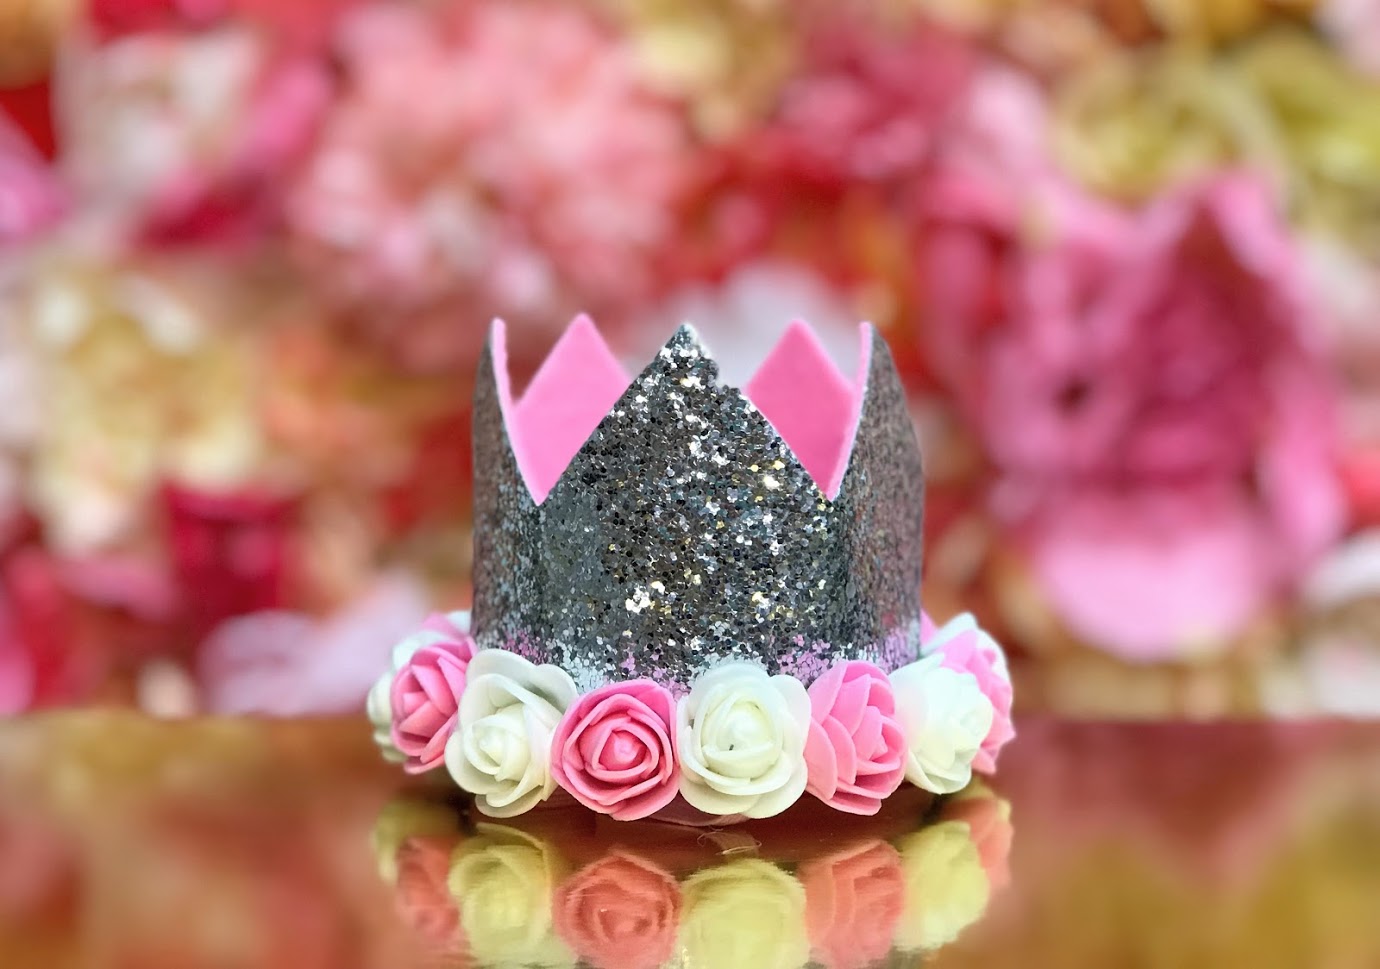 Sweet Wink - The Silver Flower Crown is the perfect addition to any birthday party or everyday dress up! Since this crown does not have a number on it, it can be worn for multiple occasions. Makes a great birthday present for any little girl in your life! Item description:  Silver glitter crown Pink and ivory flowers trim the base of the crown Light pink felt lining inside the crown and on the bottom of the crown to ensure comfort and softness on the child's head Light pink elastic to secure crown to child'